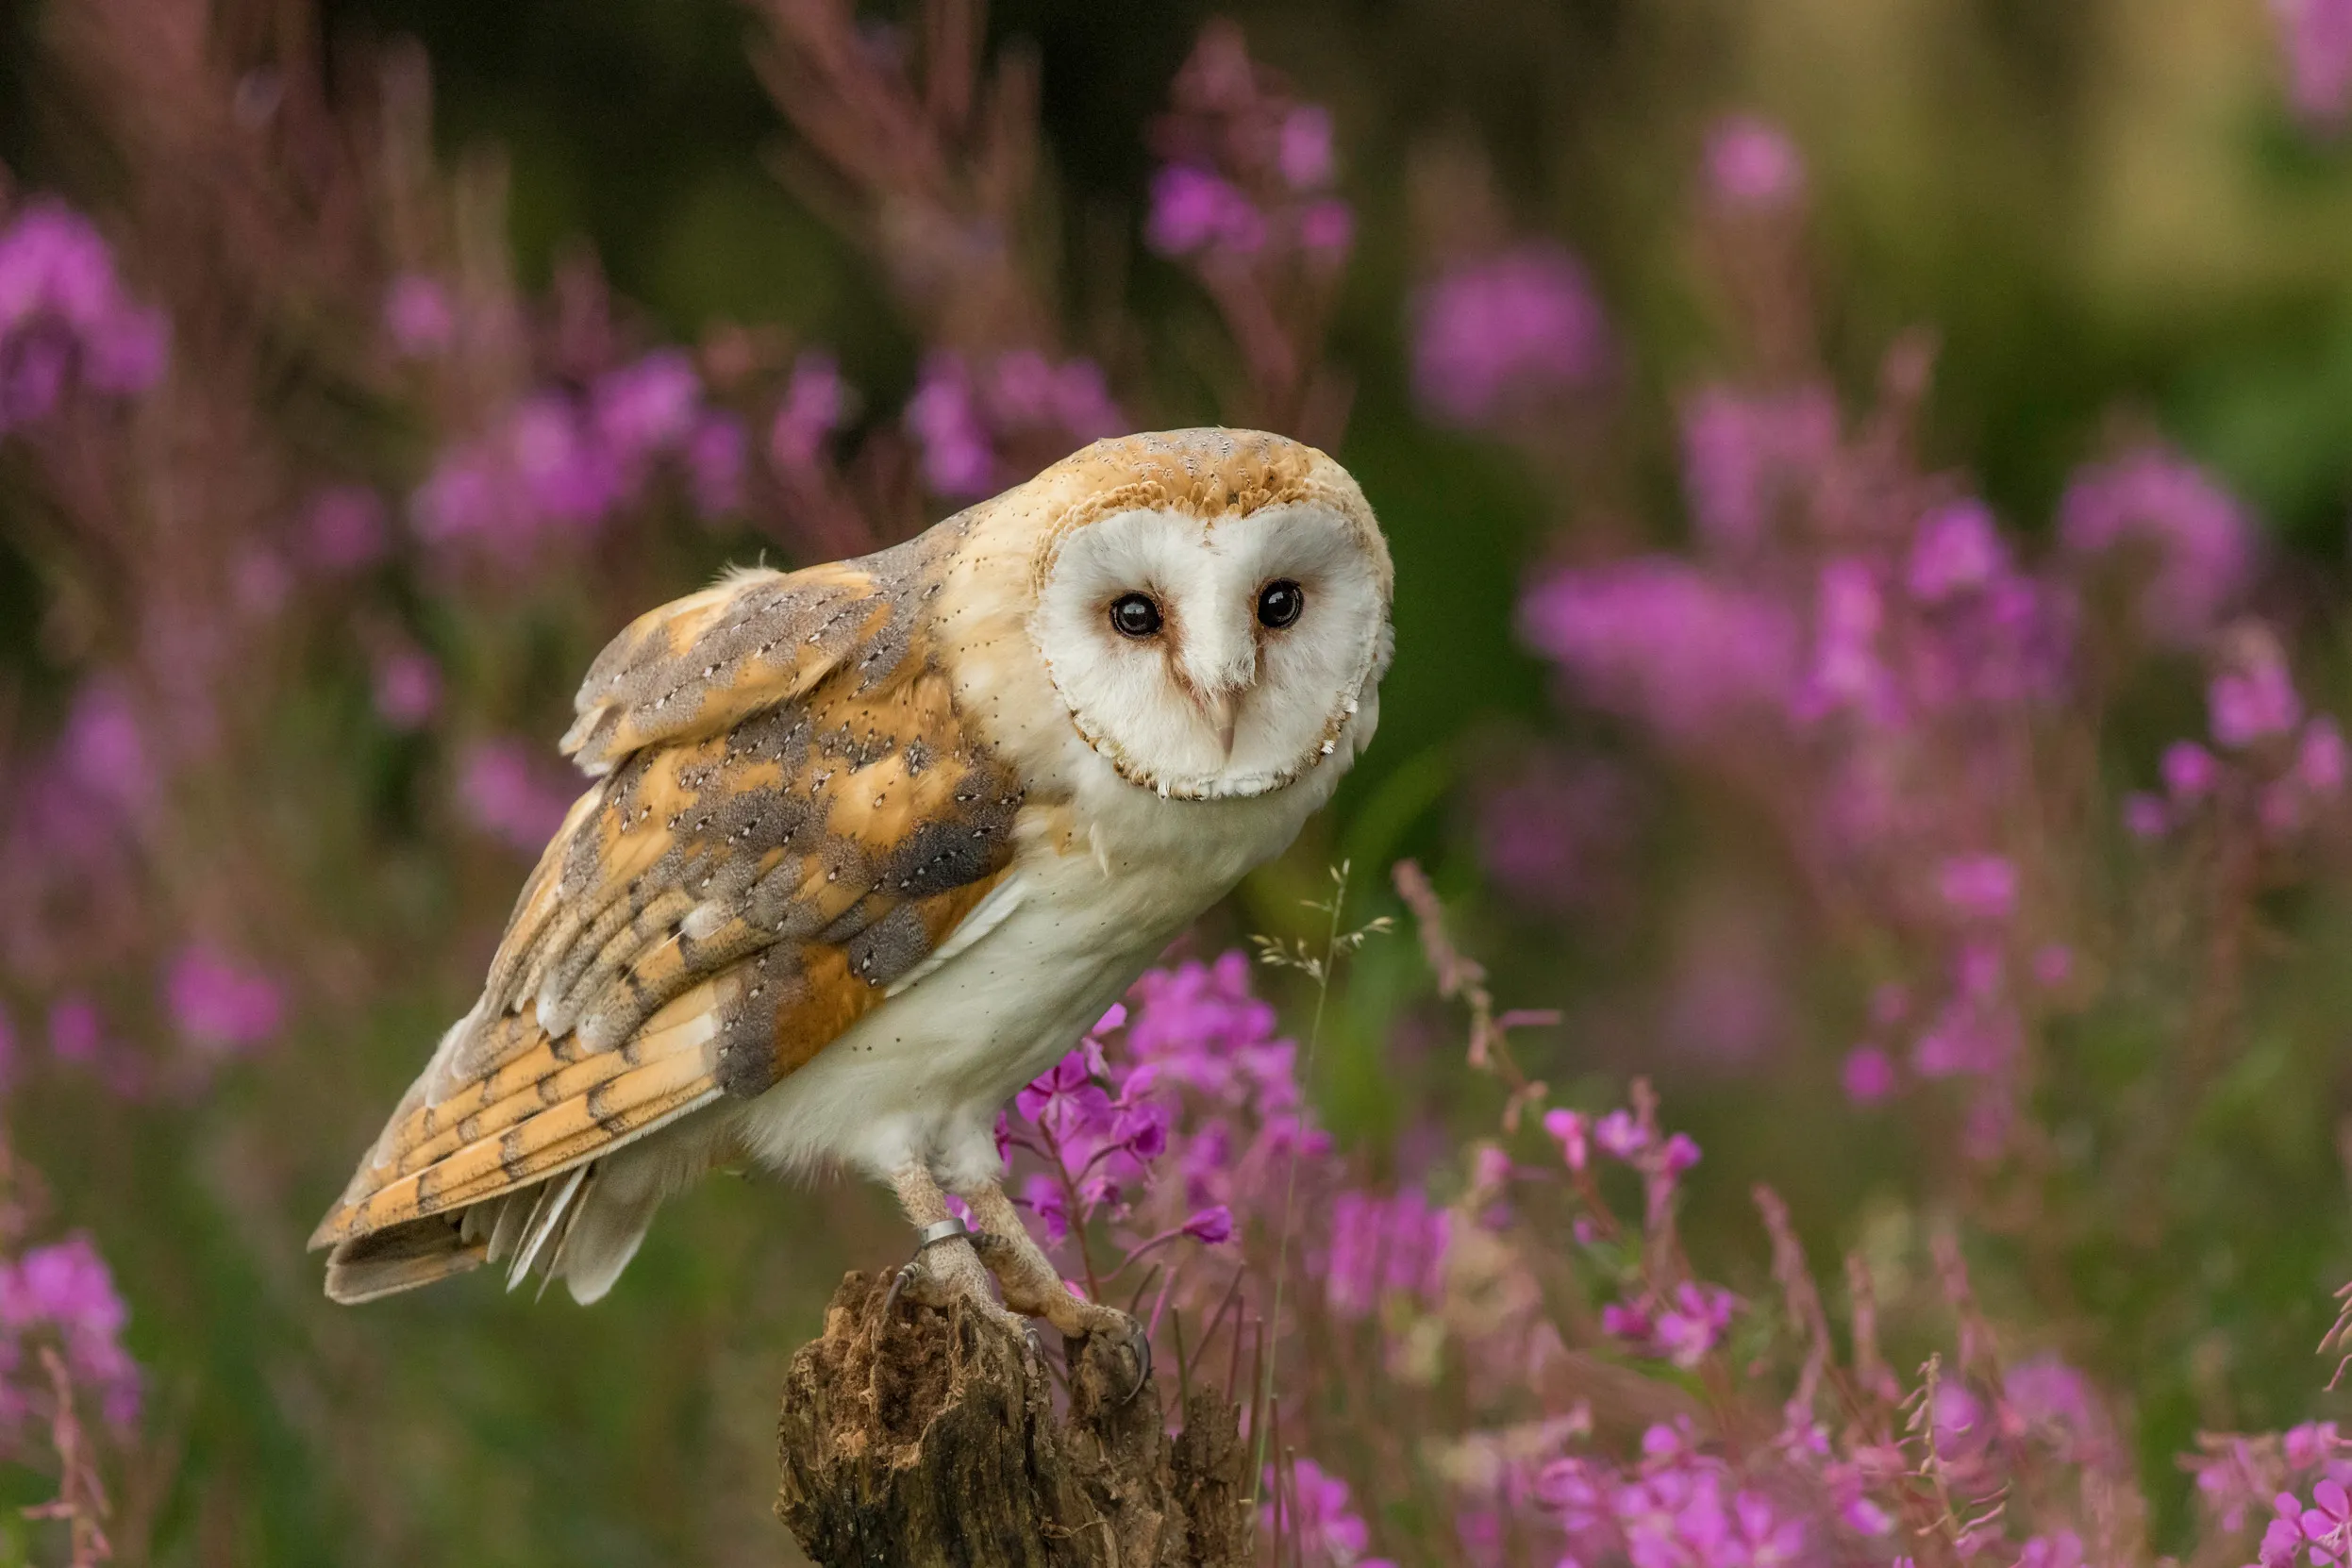 A barn owl perched on an old fence post in amongst pink flowers.